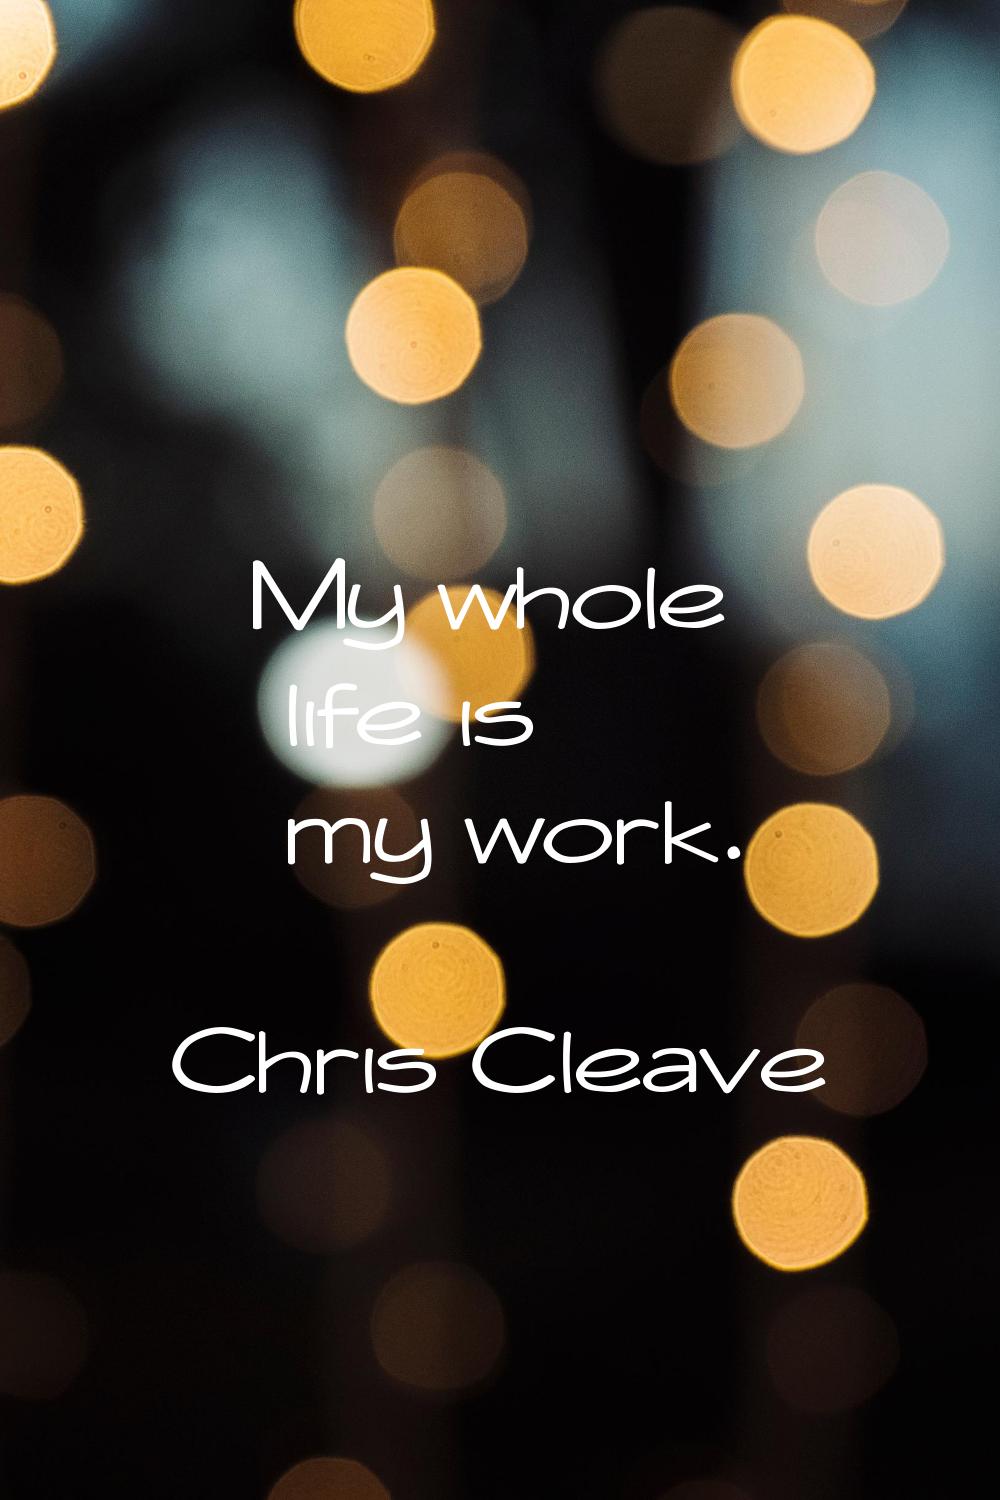 My whole life is my work.